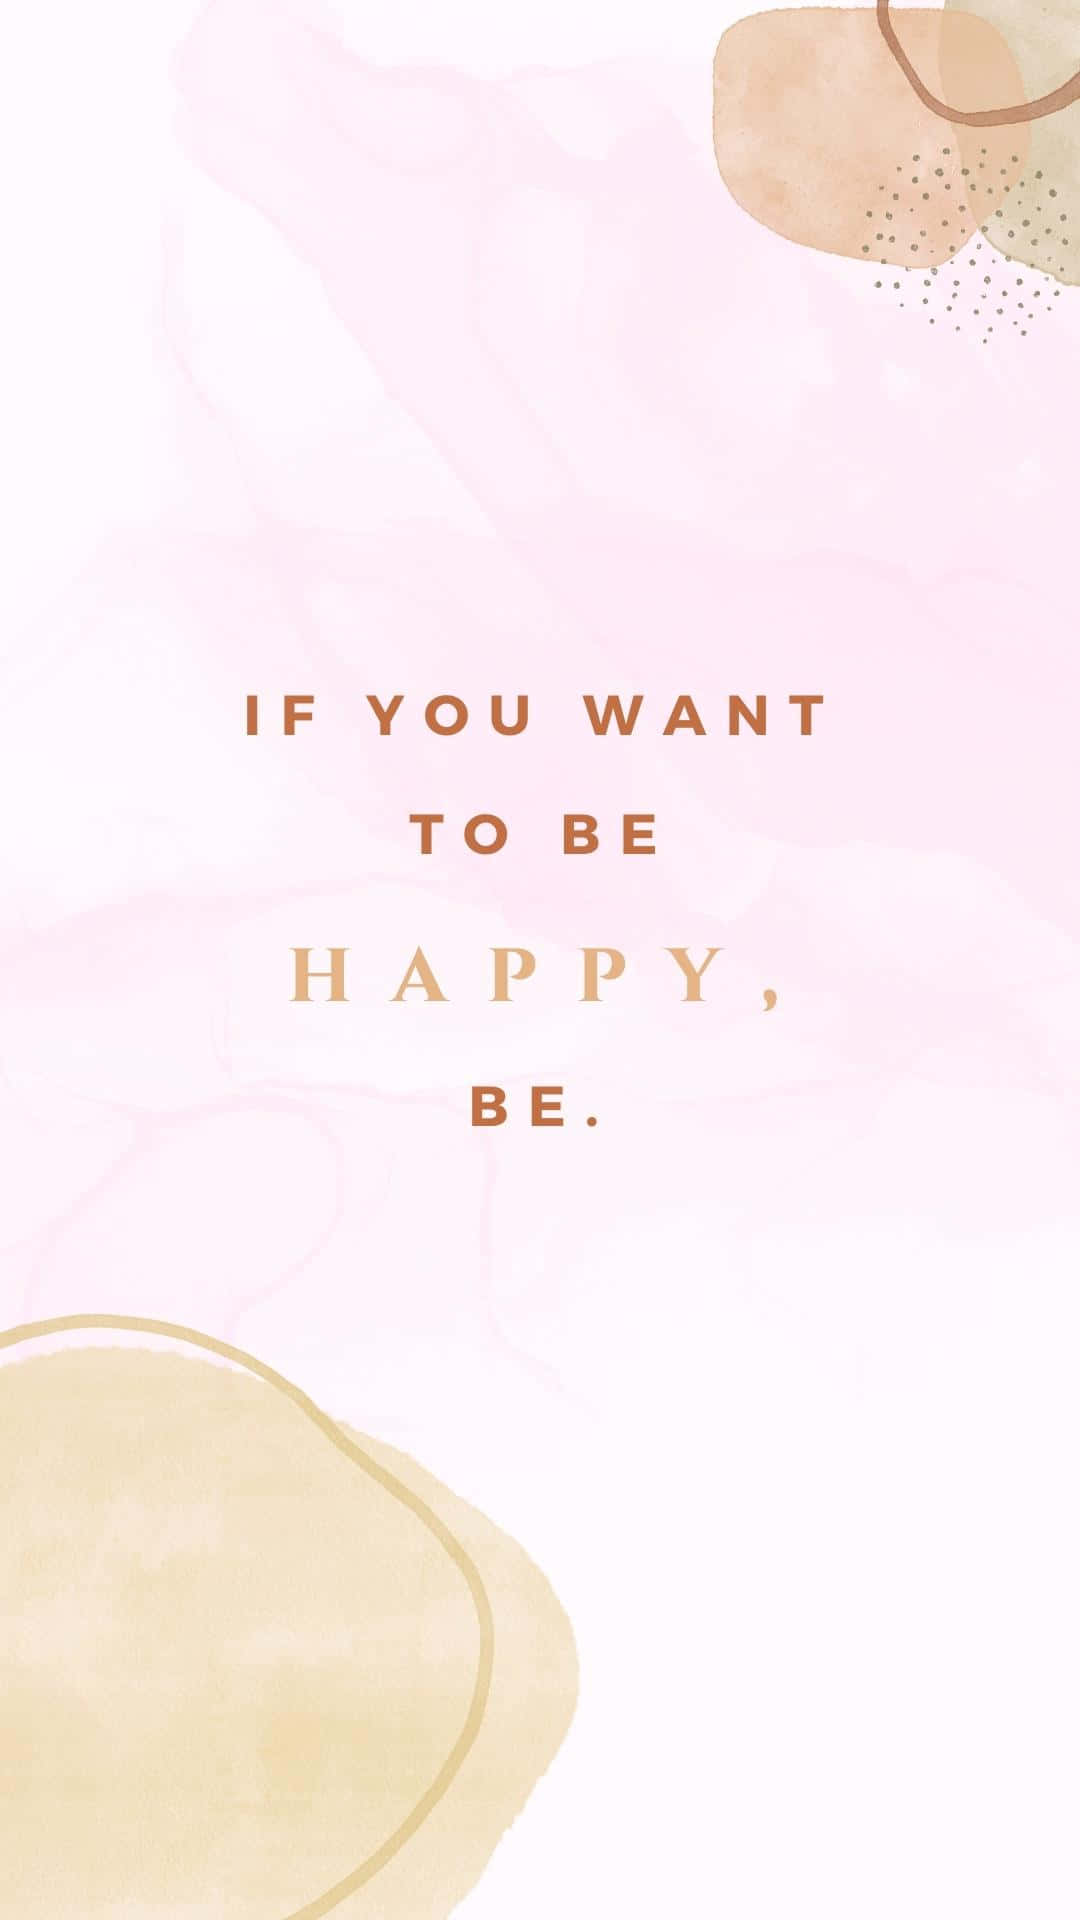 “Be Happy, Be Bright and Keep Shining” Wallpaper